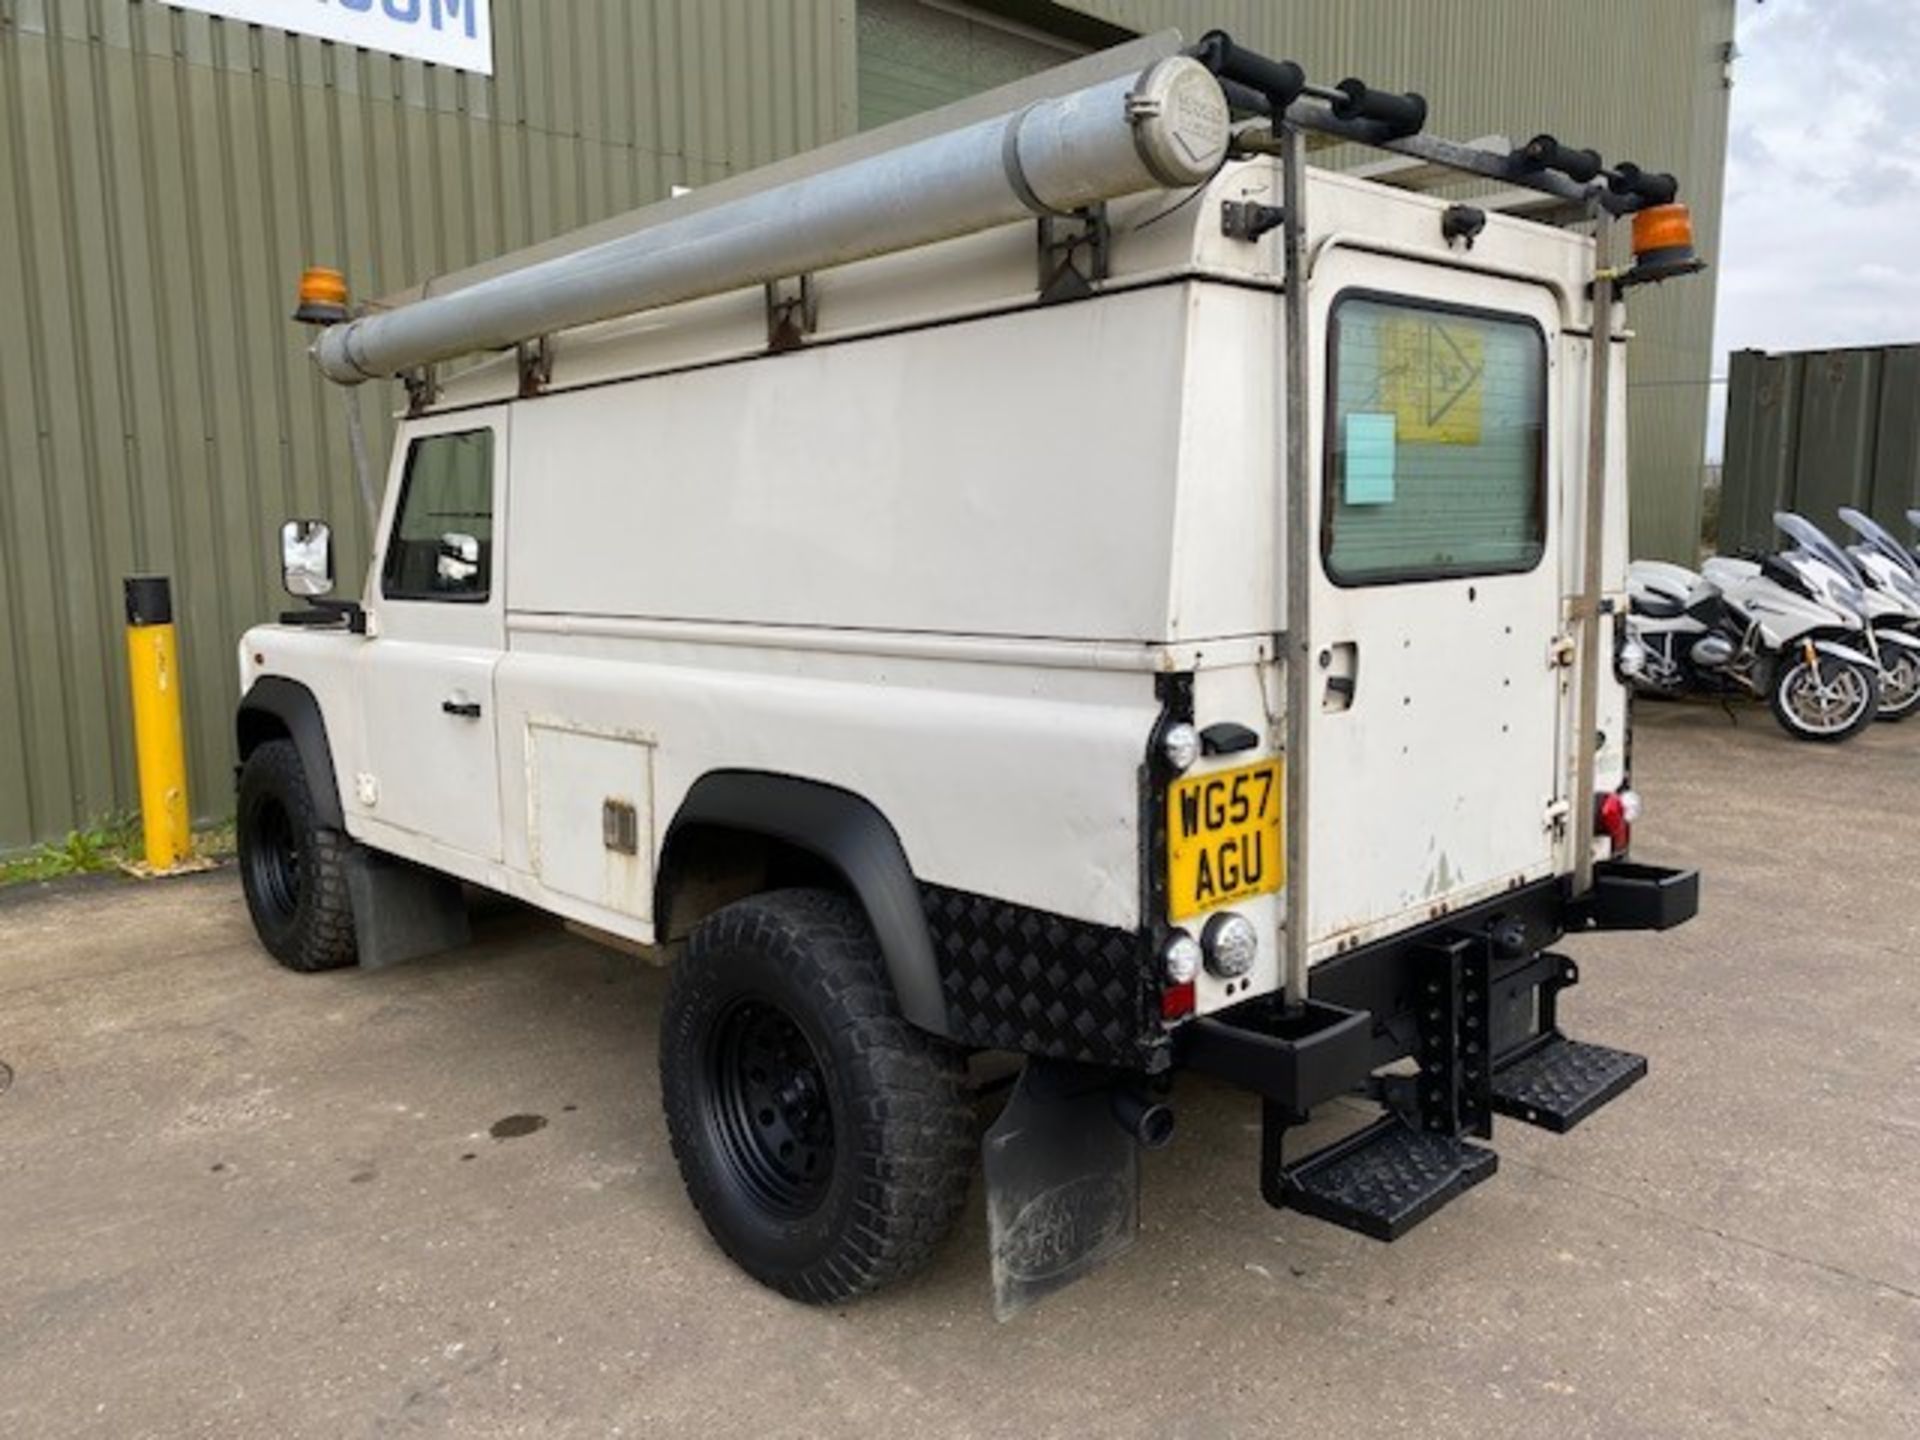 Land Rover Defender 110 Utility - Image 7 of 60